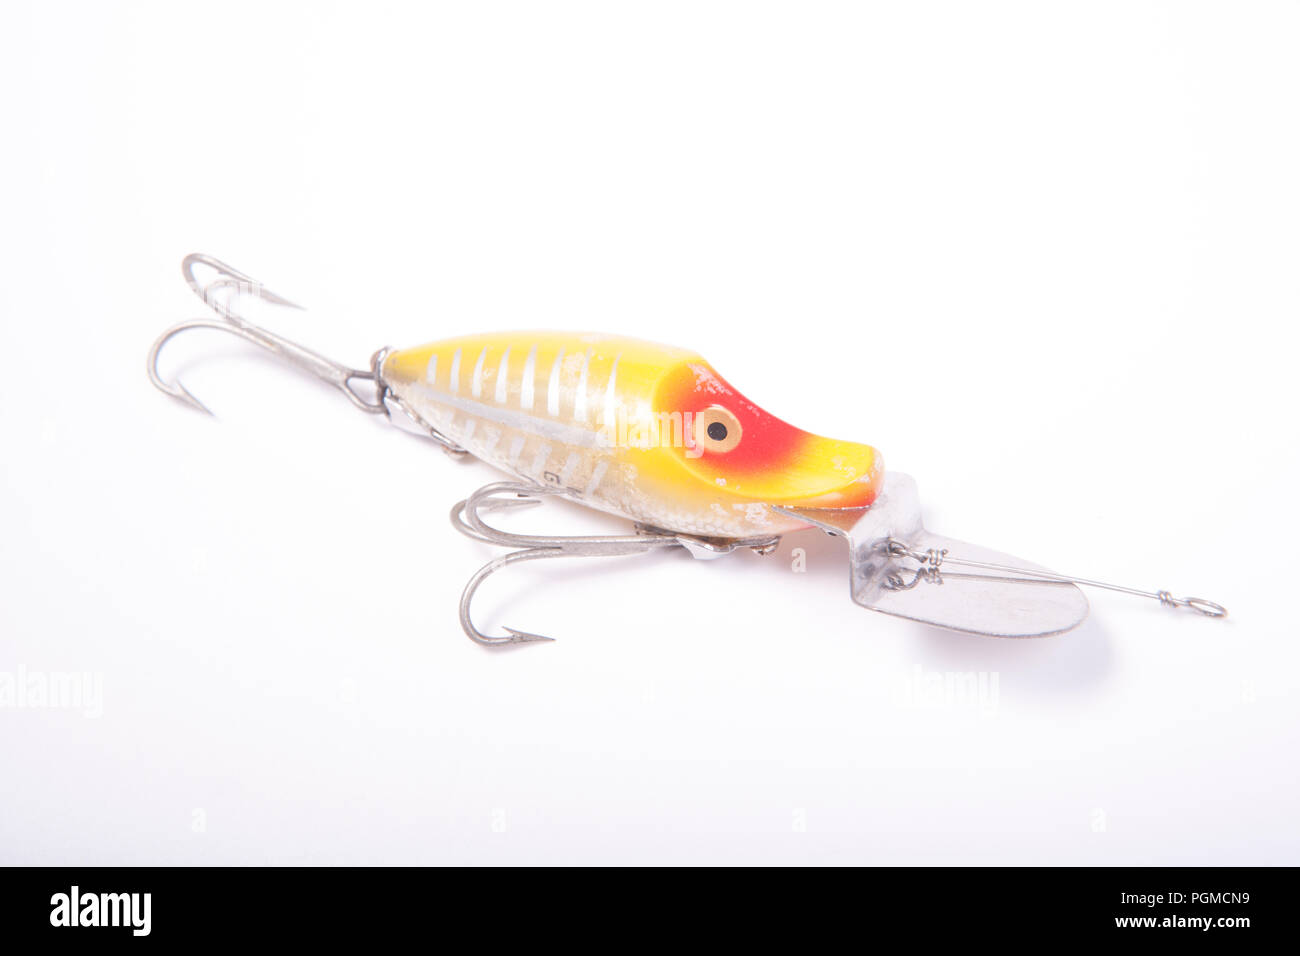 A small fishing lure, or plug, equipped with two treble hooks for catching predatory fish. This plug is designed to dive when it is reeled in.  From a Stock Photo